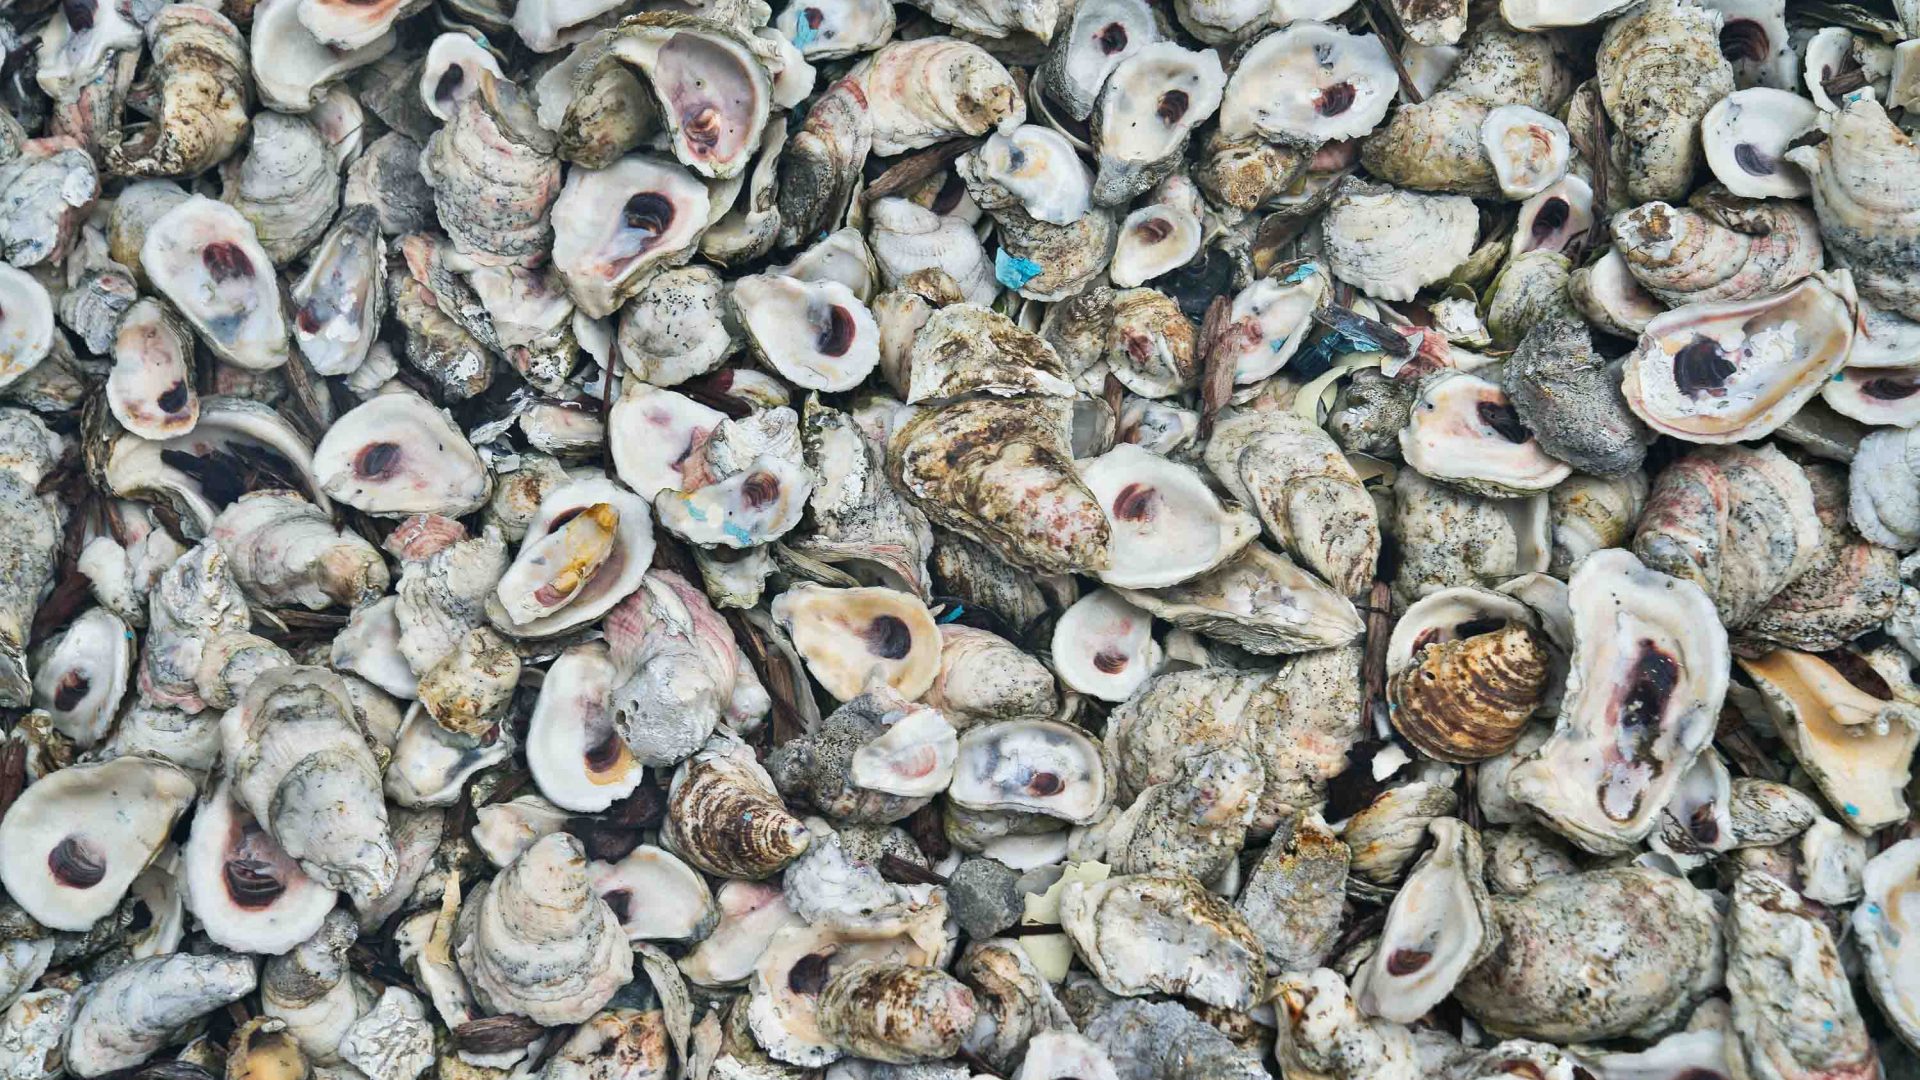 Keep shucking, stop chucking: How oyster shell waste is rebuilding Moreton Bay’s reef